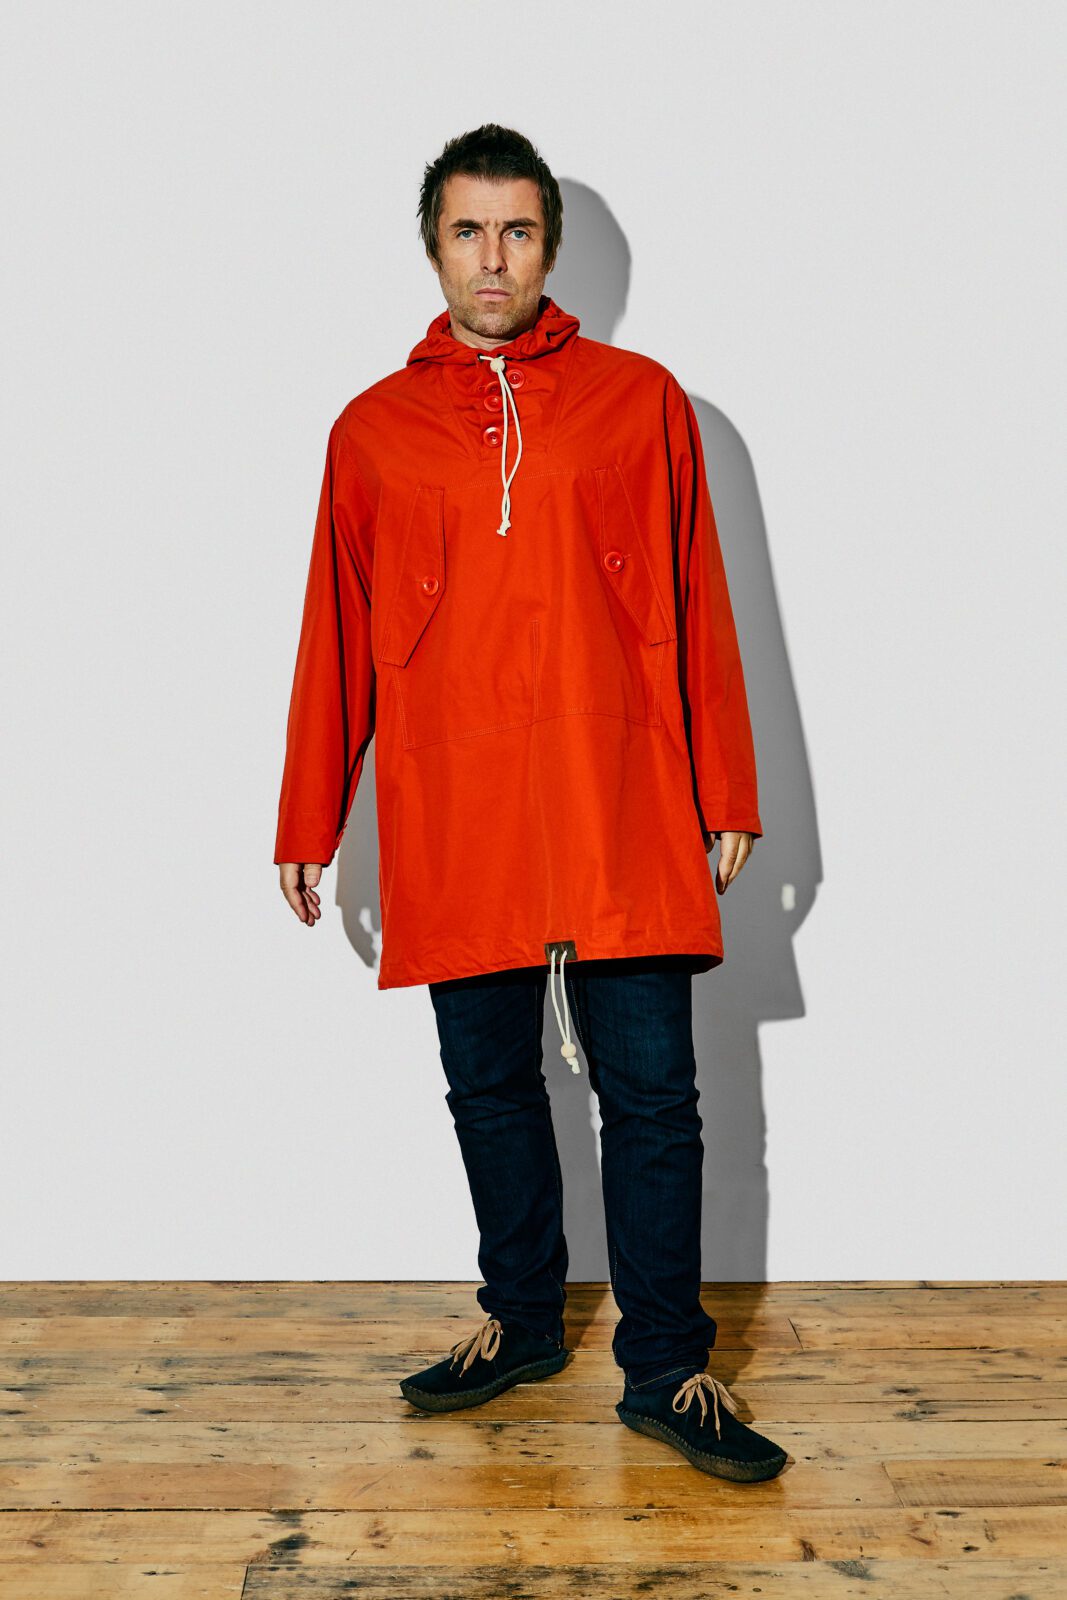 Liam Gallagher launches exclusive Selfridges fashion collection, featuring £165 shorts and a £60 bucket hat, The Manc